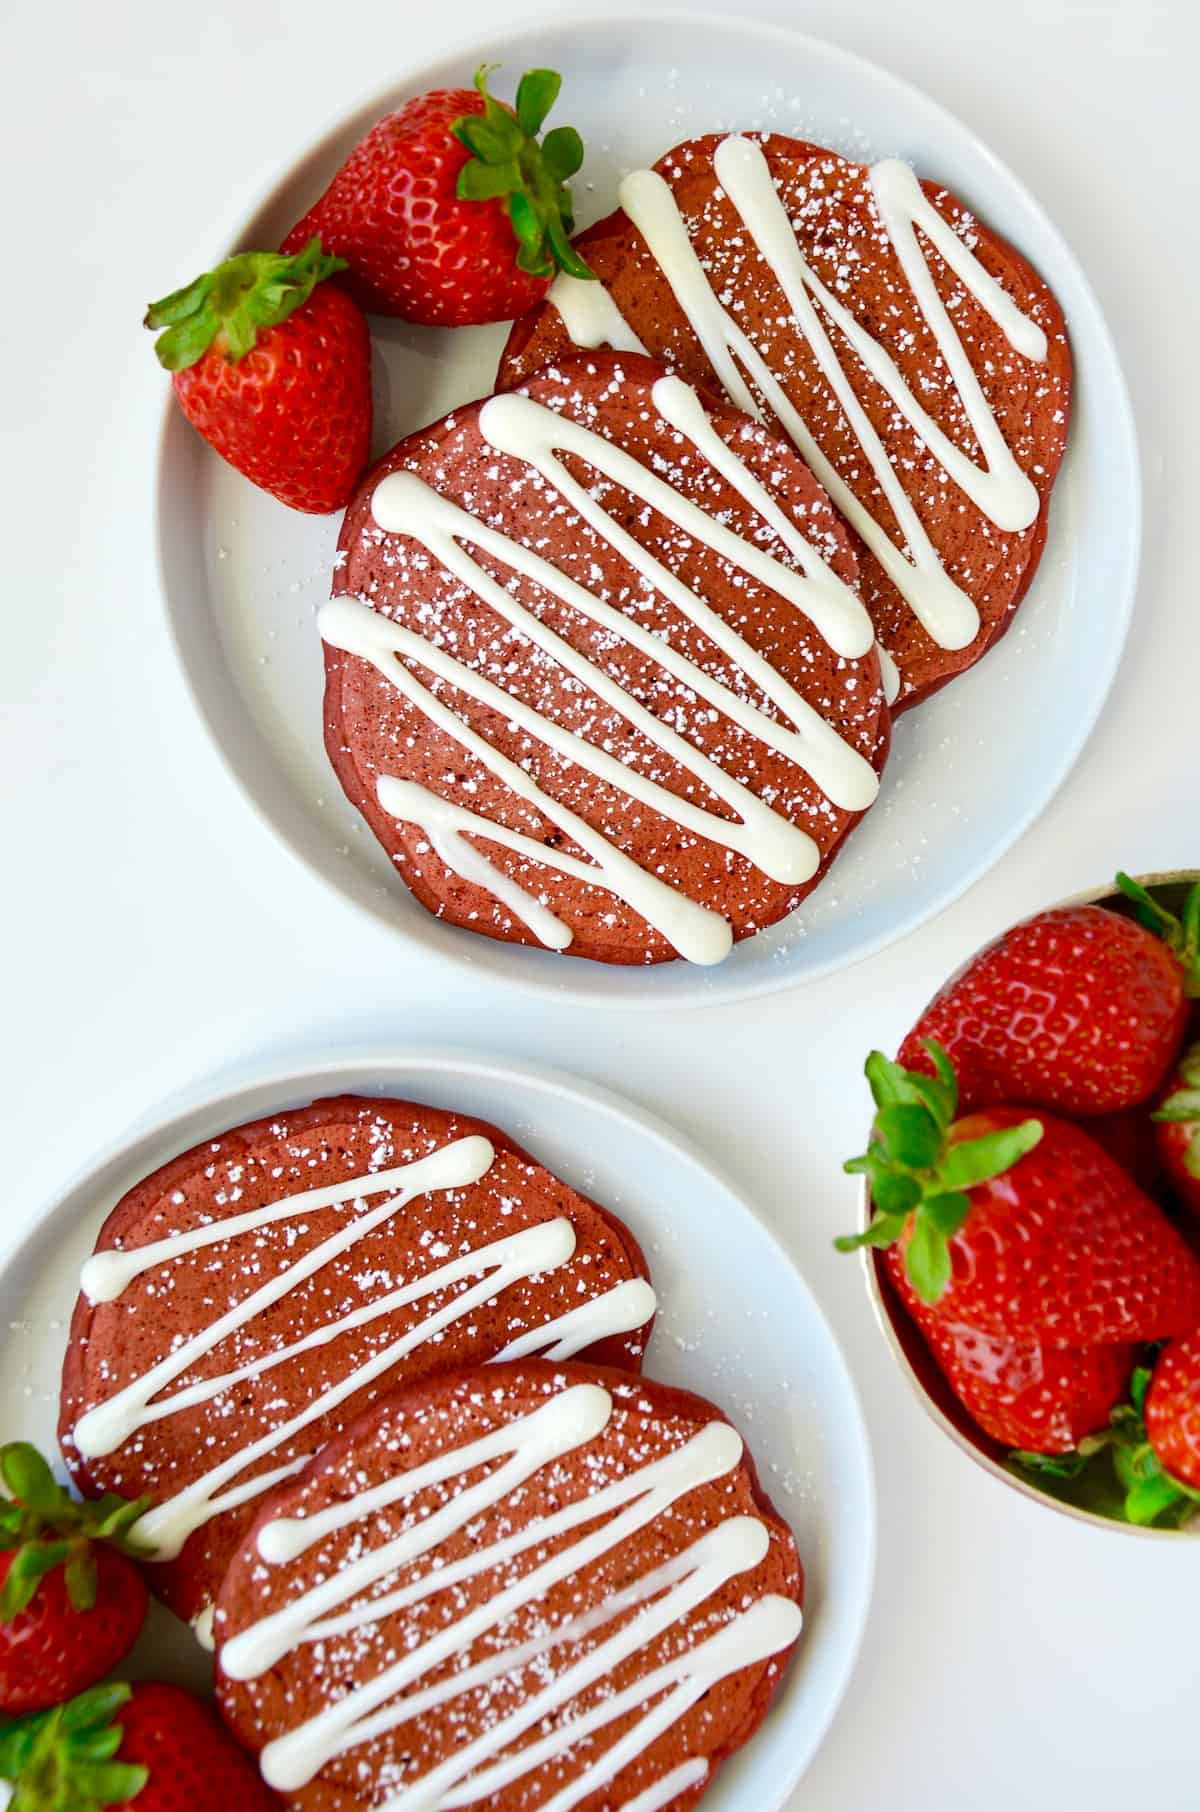 Red velvet pancakes drizzled with cream cheese glaze and sprinkled with powdered sugar are on white plates and garnished with strawberries. A bowl of strawberries sits nearby.